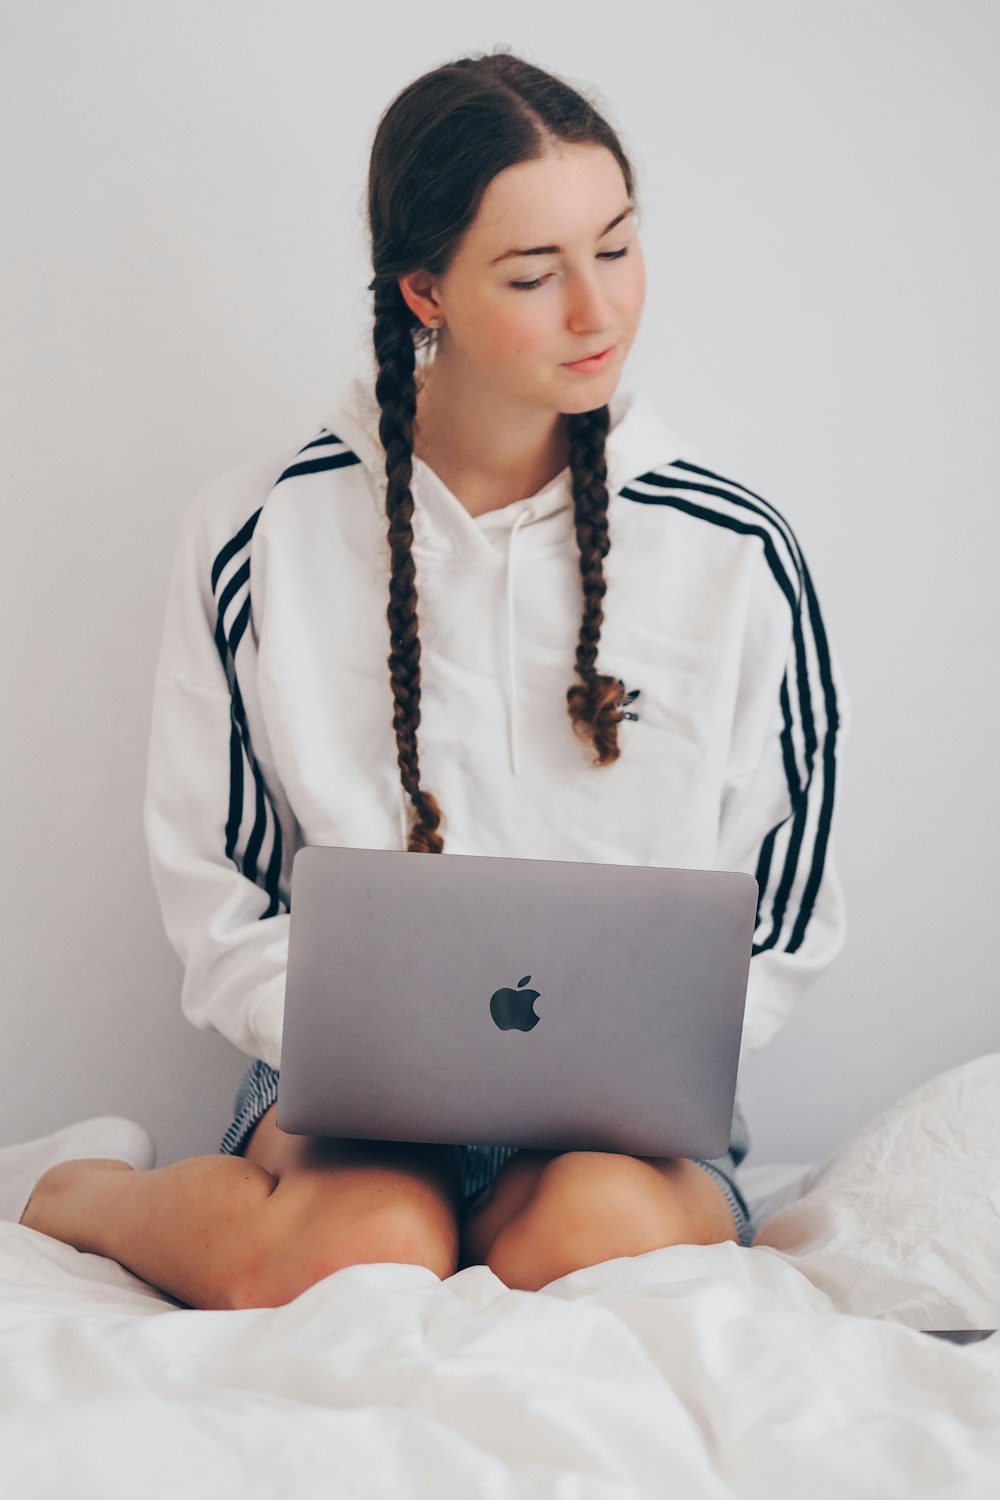 woman in white and black long sleeve shirt using silver macbook